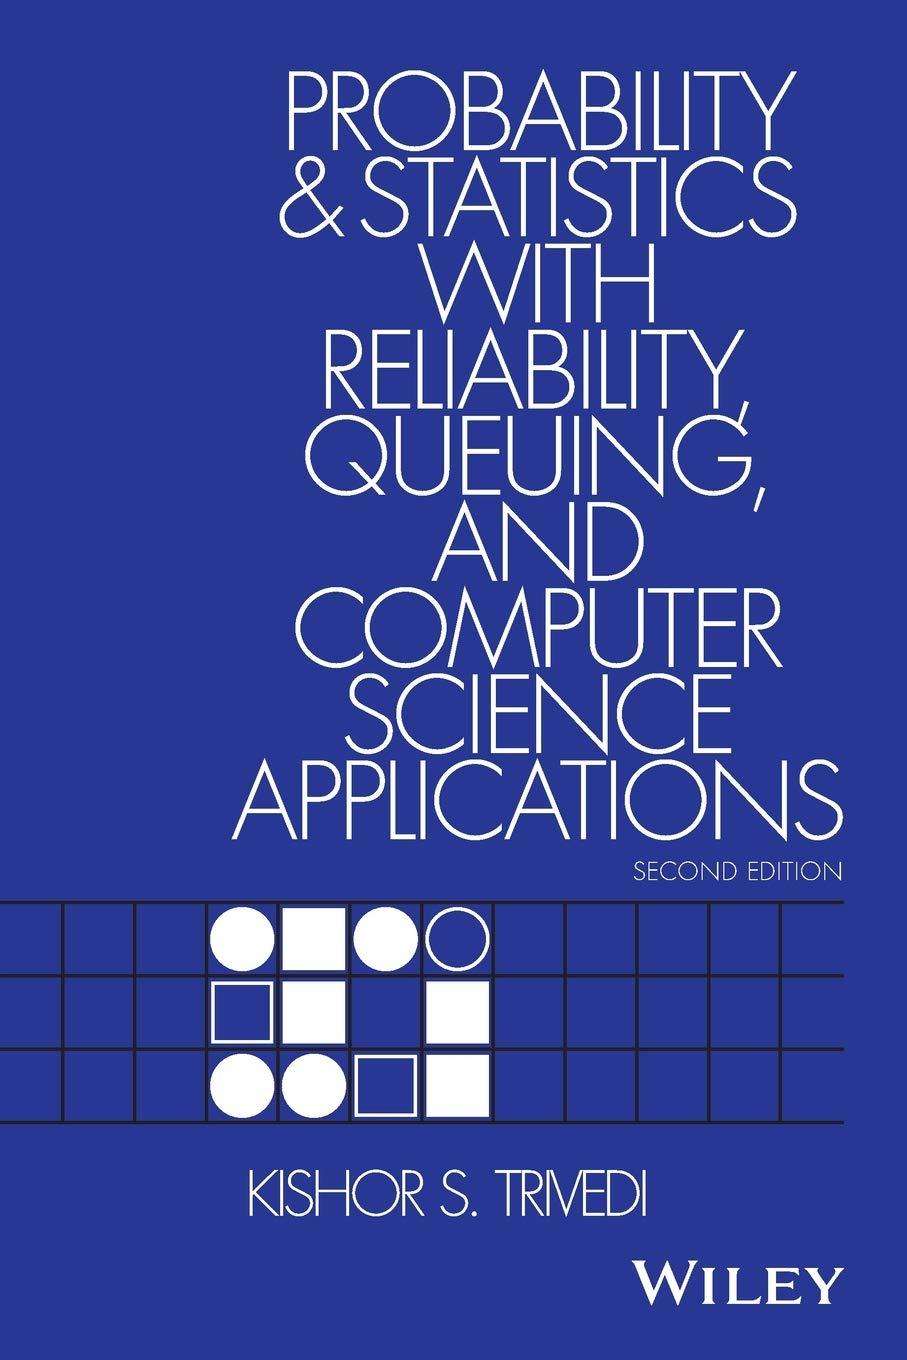 probability and statistics with reliability queuing and computer science applications 2nd edition kishor s.